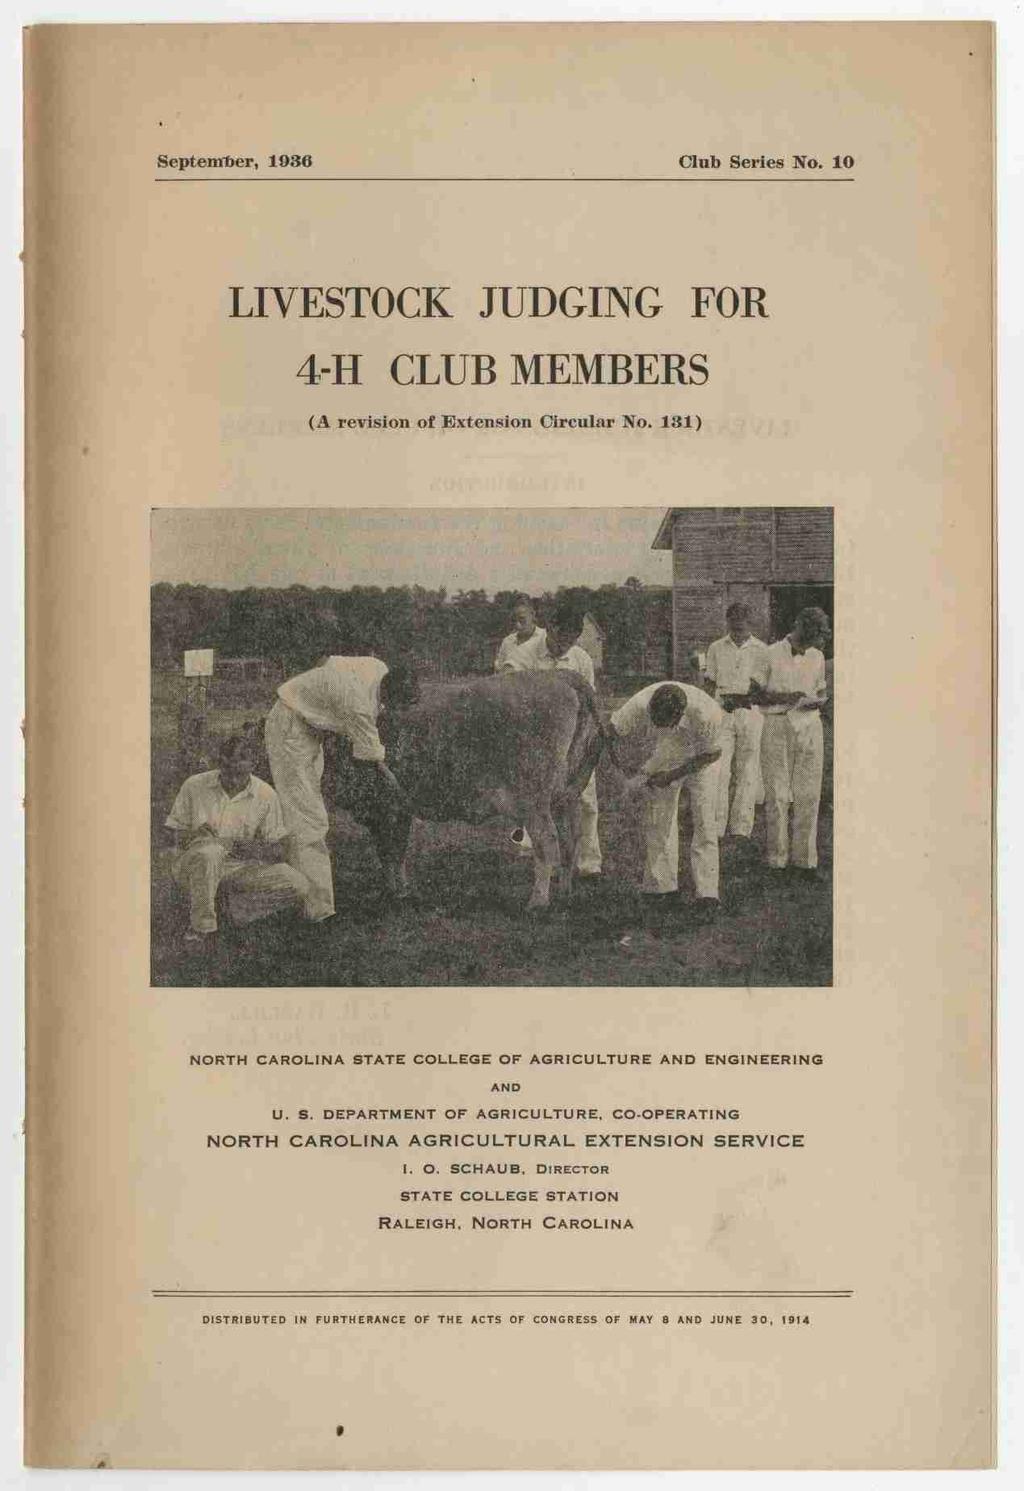 September, 1936. Club Series No. 10 LIVESTOCK JUDGING FOR 4-H CLUB MEMBERS (A revision of Extension Circular No. 131) NORTH CAROLINA STATE COLLEGE OF AGRICULTURE AND ENGINEERING AND U. 5.